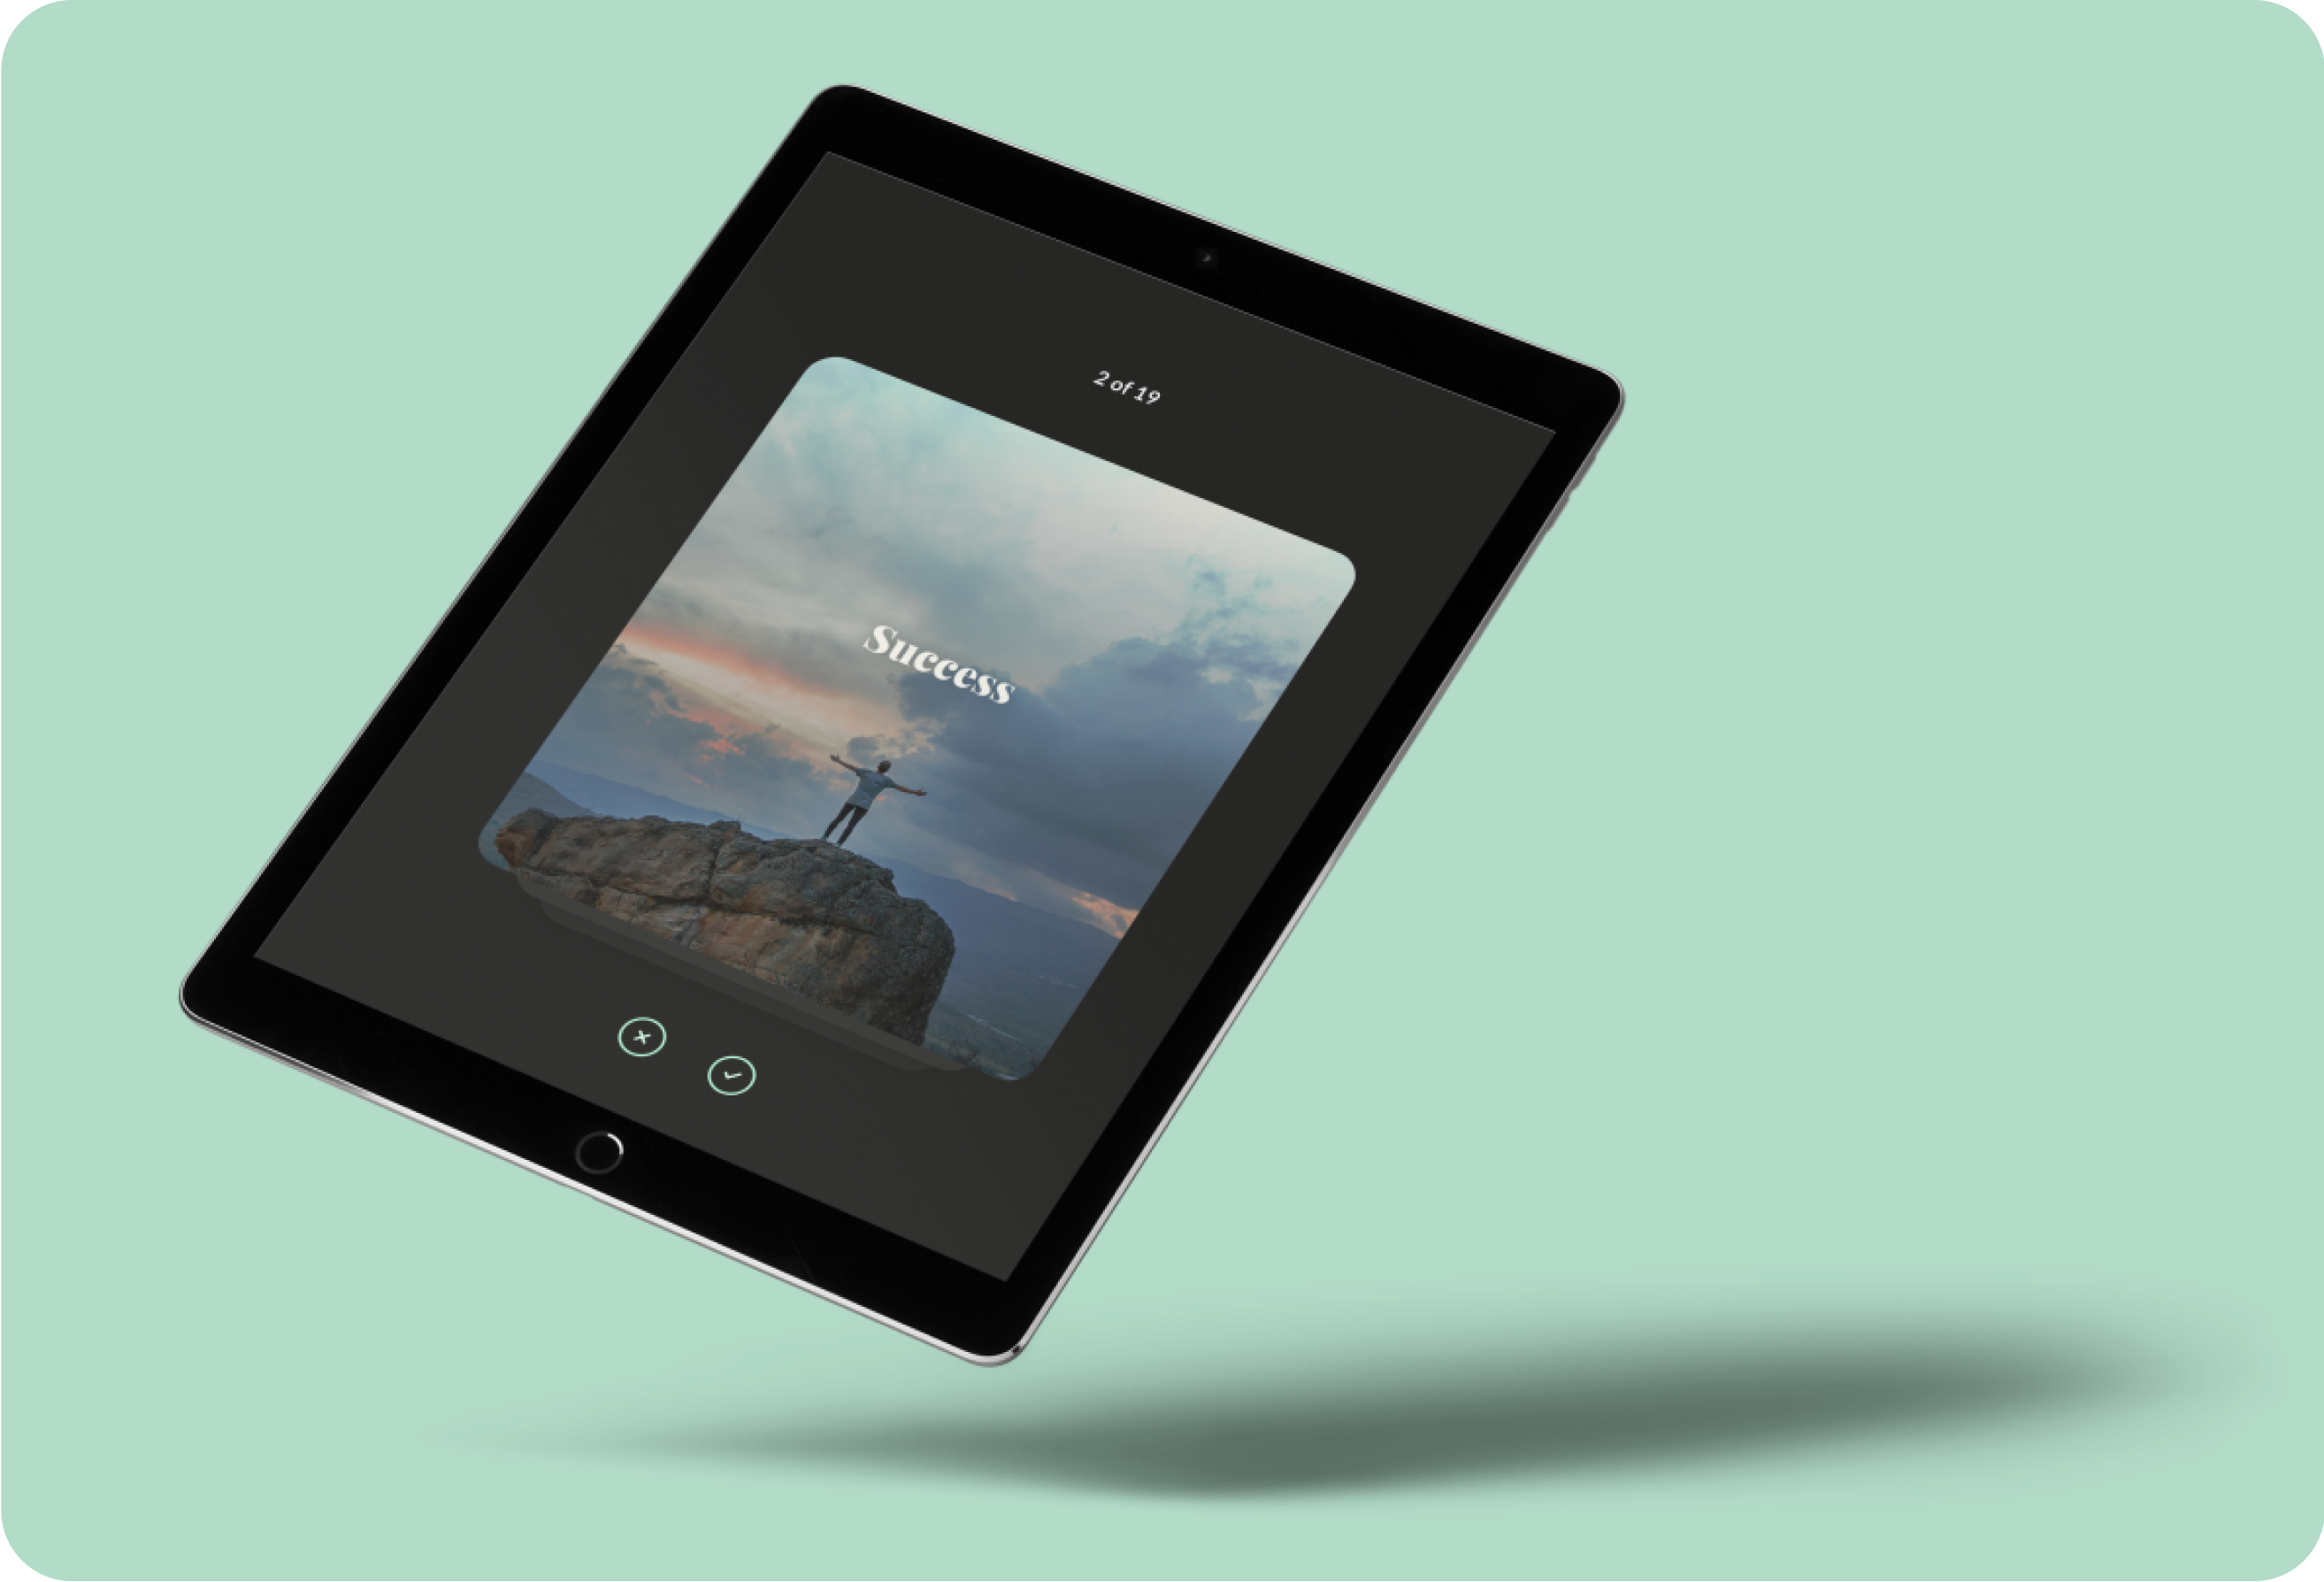 Tablet displaying "Success" screen from Qlarity mobile mindfulness app for adolescents.